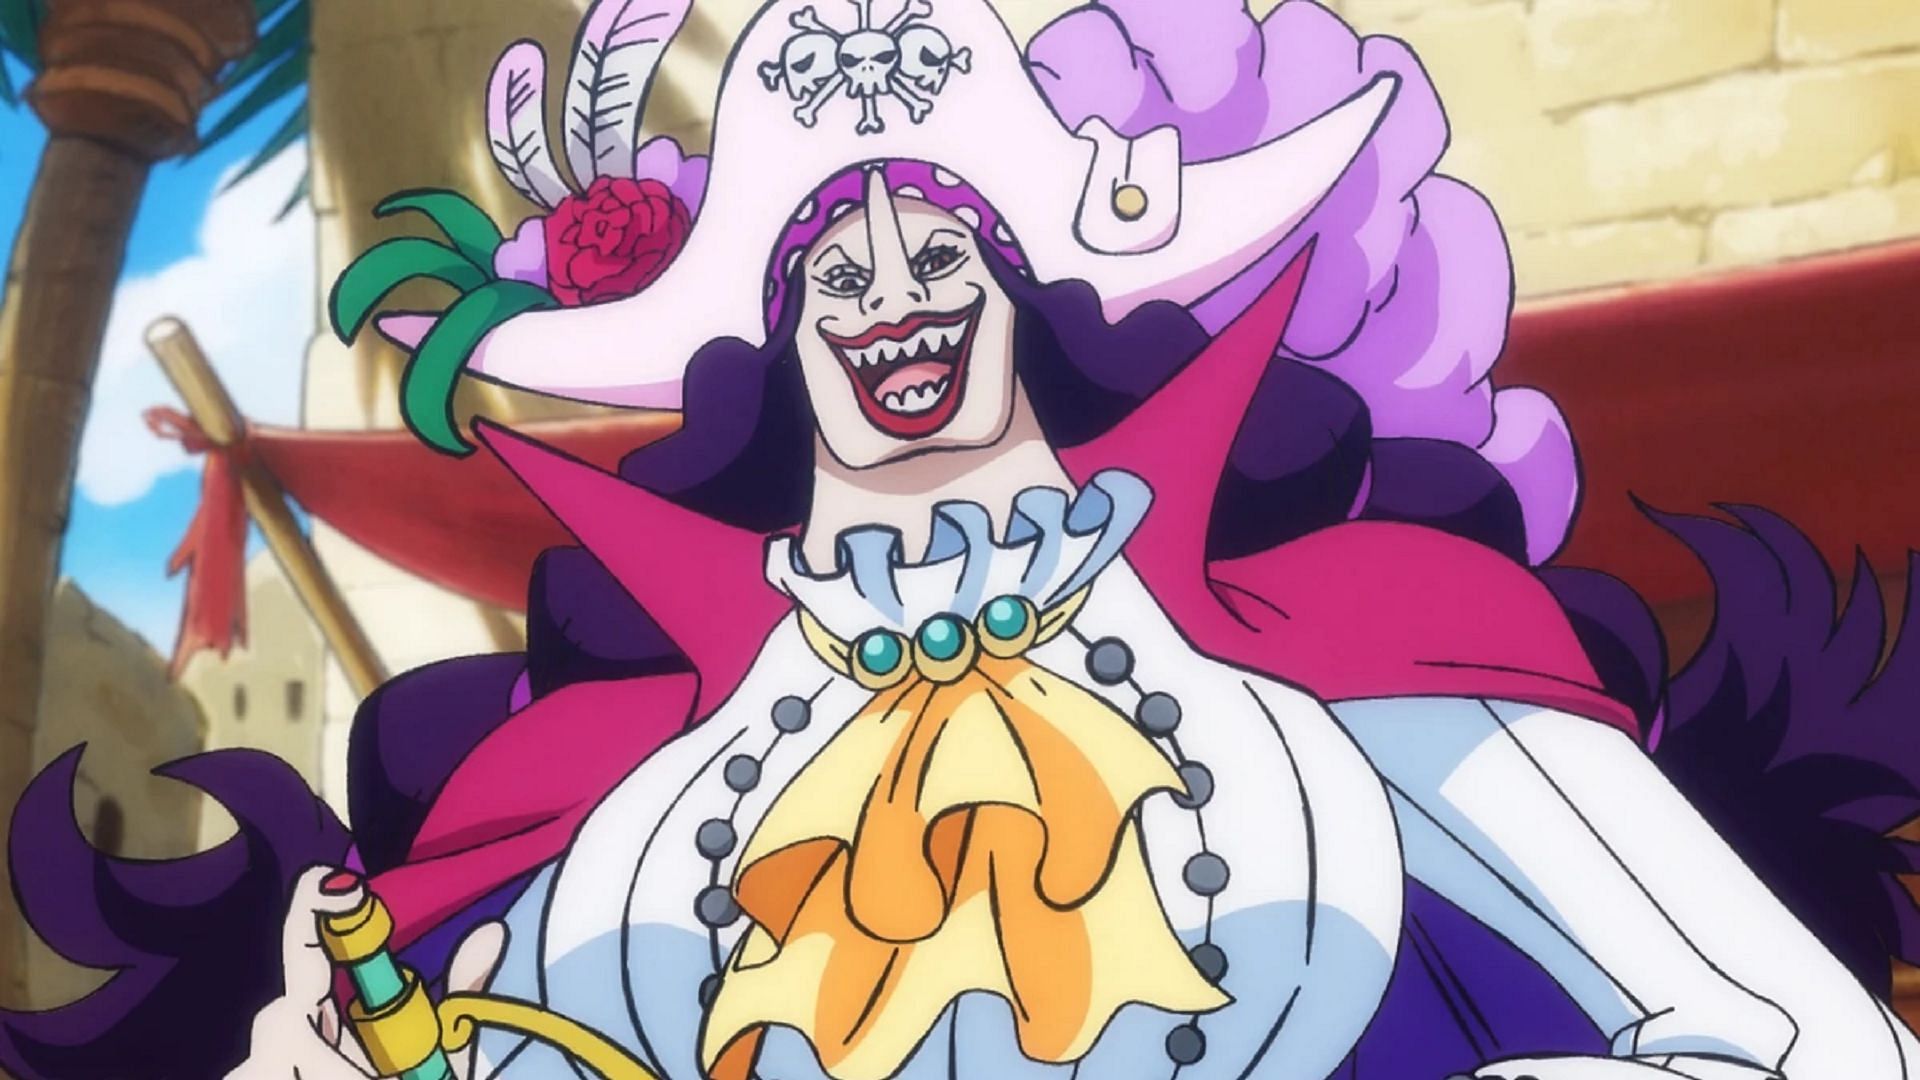 Catalina Devon in her post time skip appearance (Image via Toei Animation, One Piece)